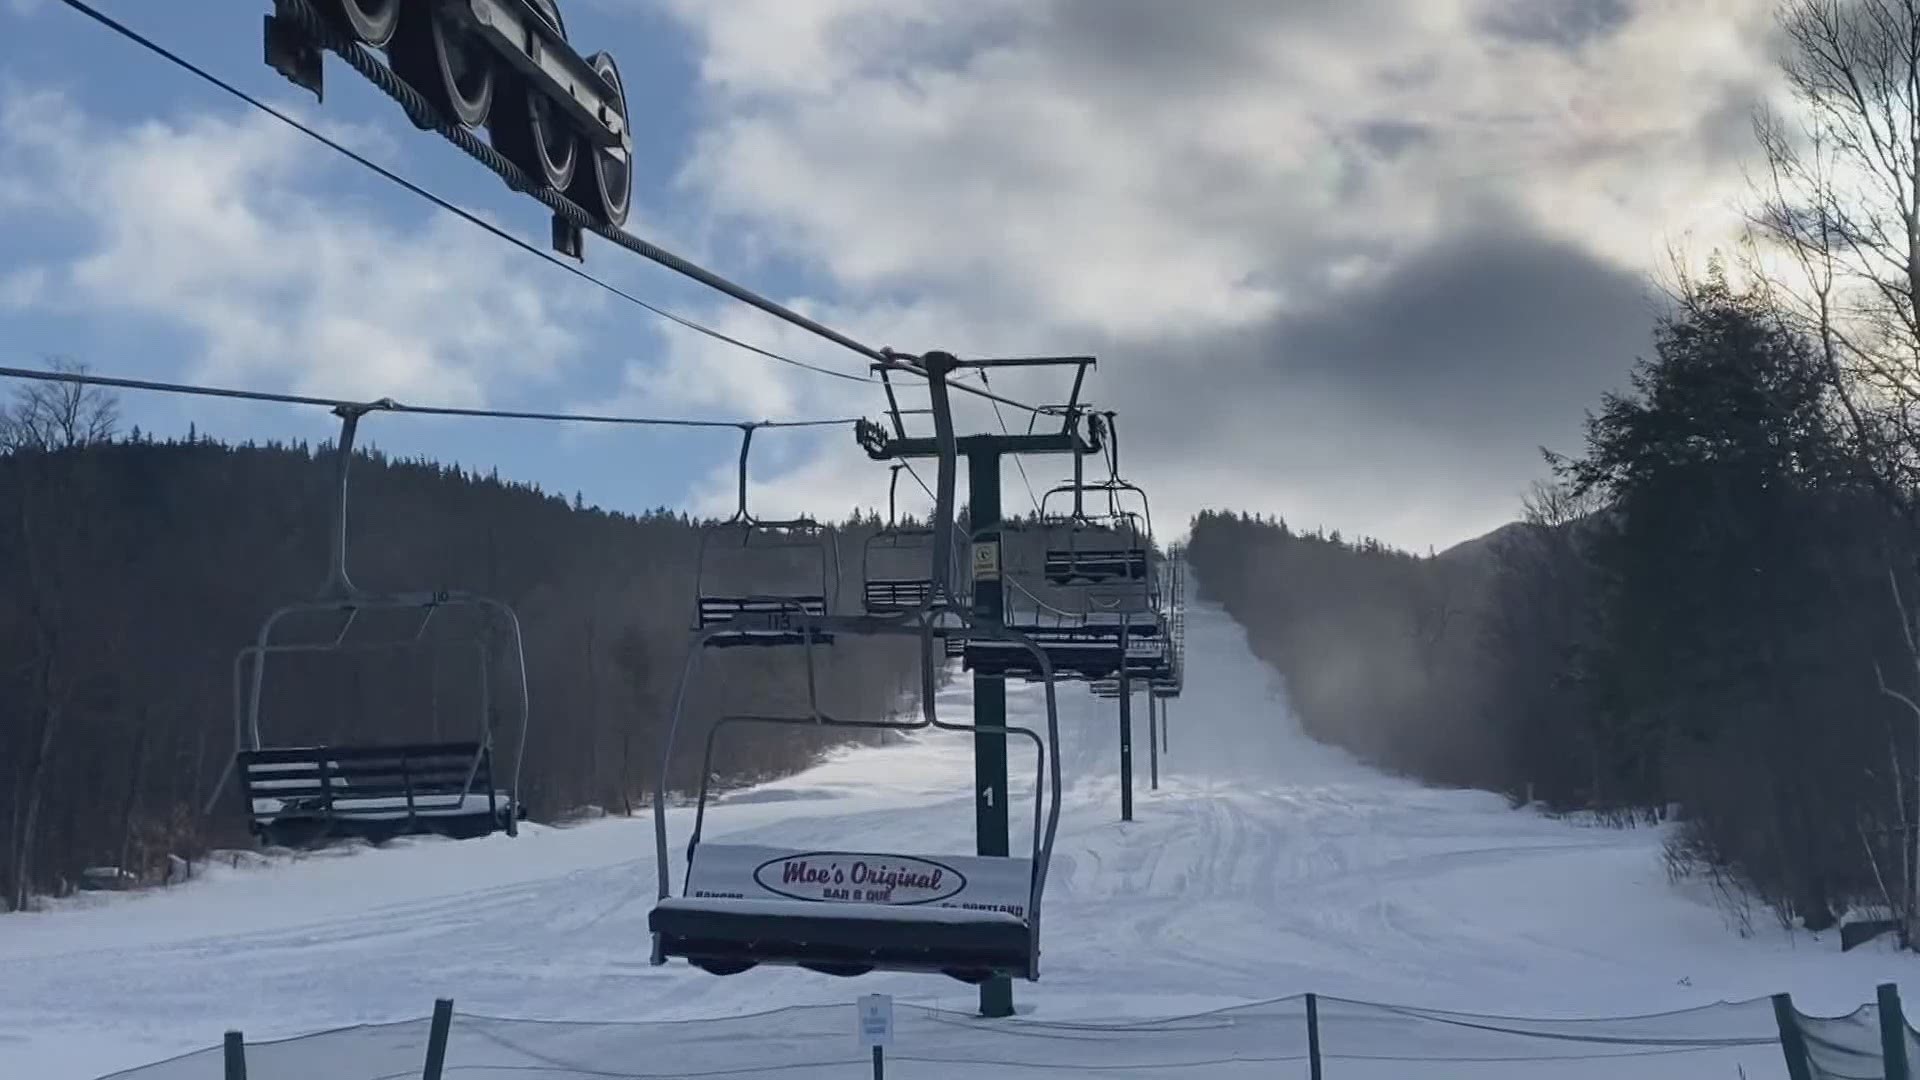 Ski resort could be coming to Moosehead Lake Maine region ...